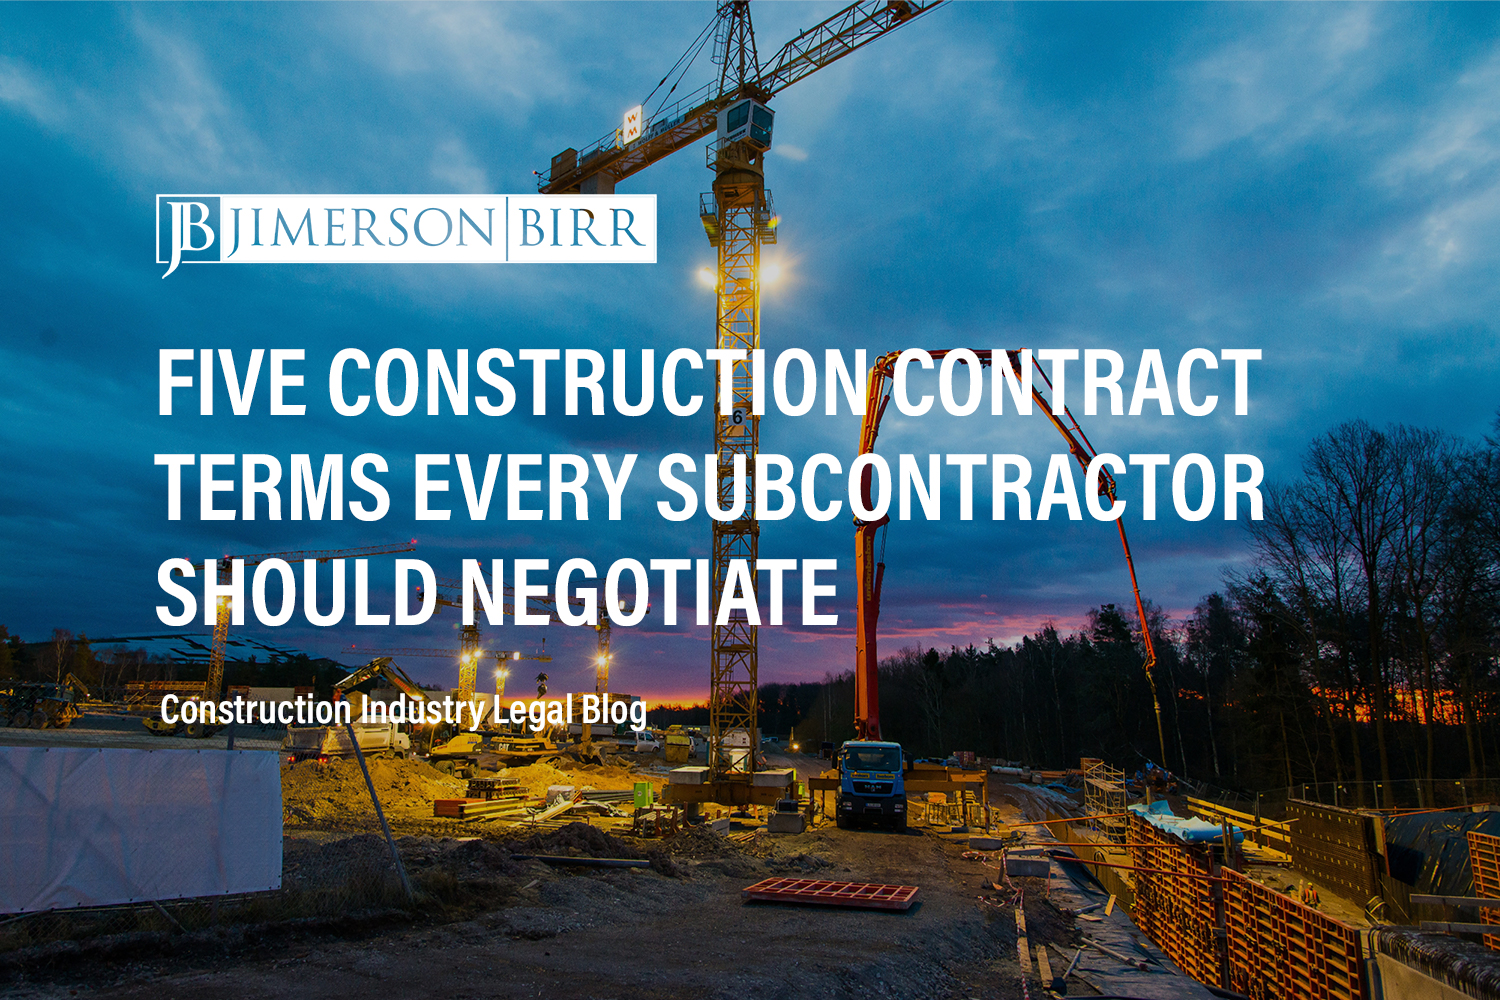 Five Key Construction Contract Terms That Every Subcontractor Needs to Negotiate